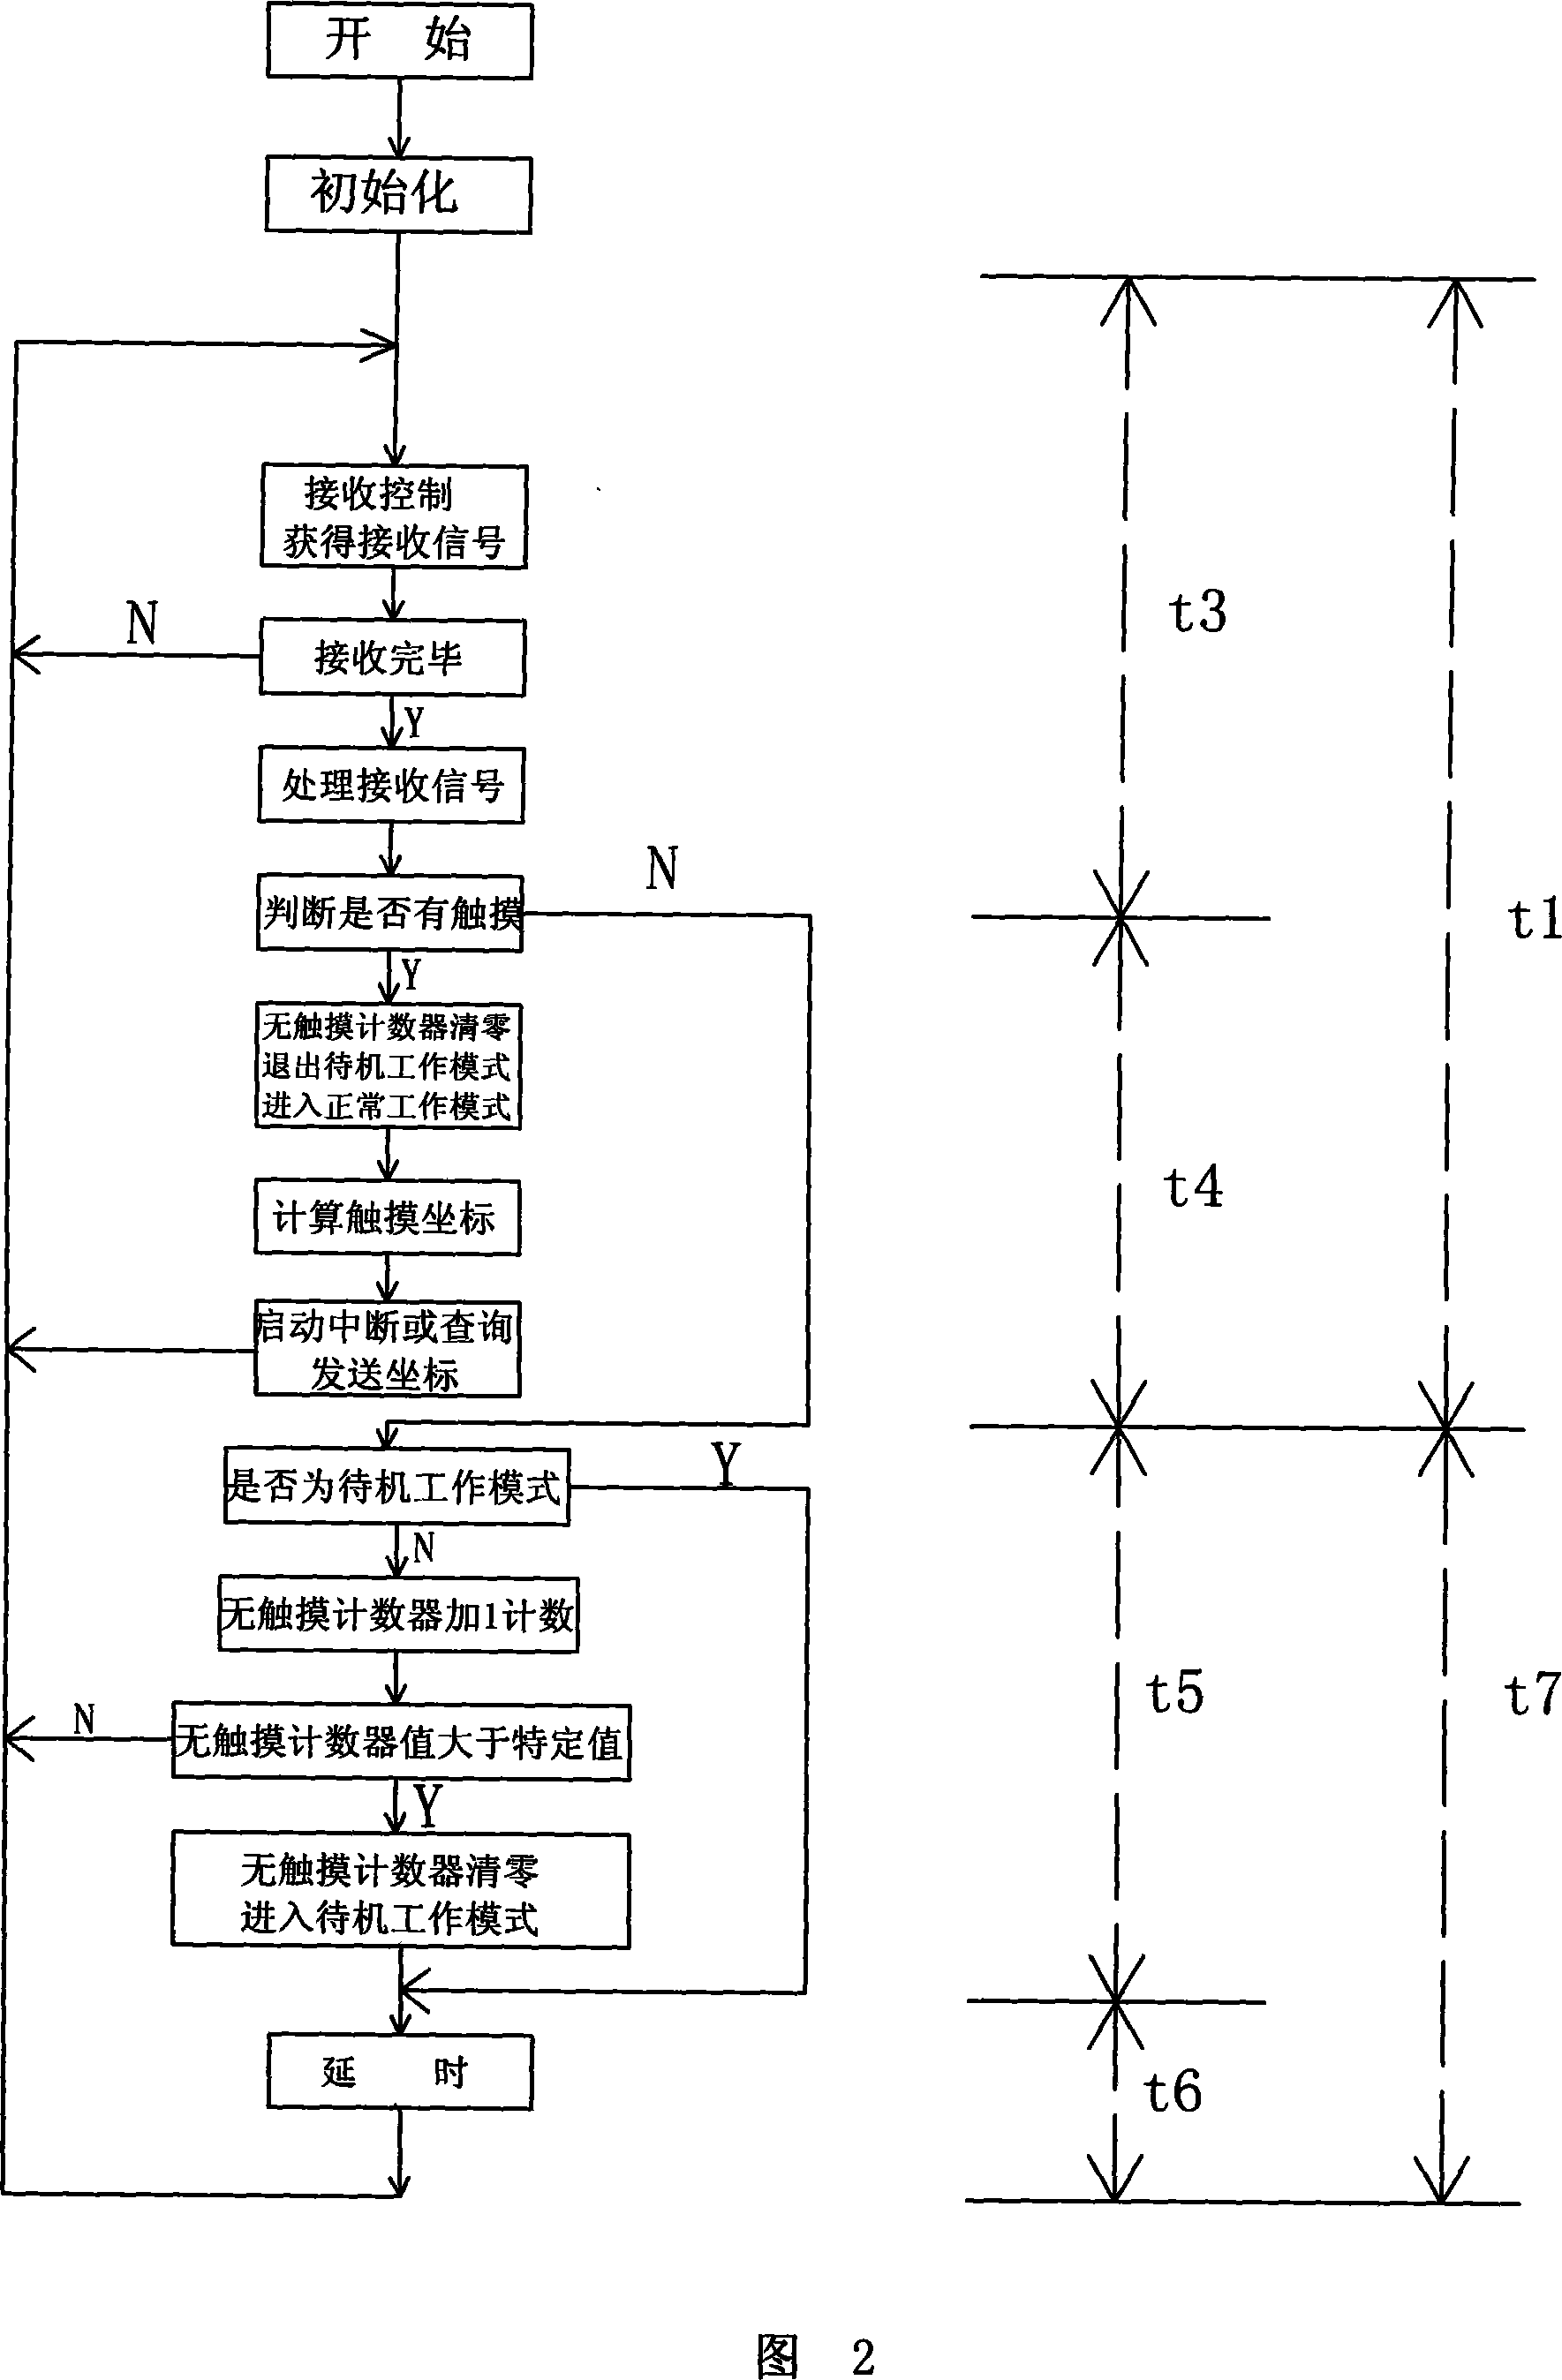 Touch screen multi-operation mode method